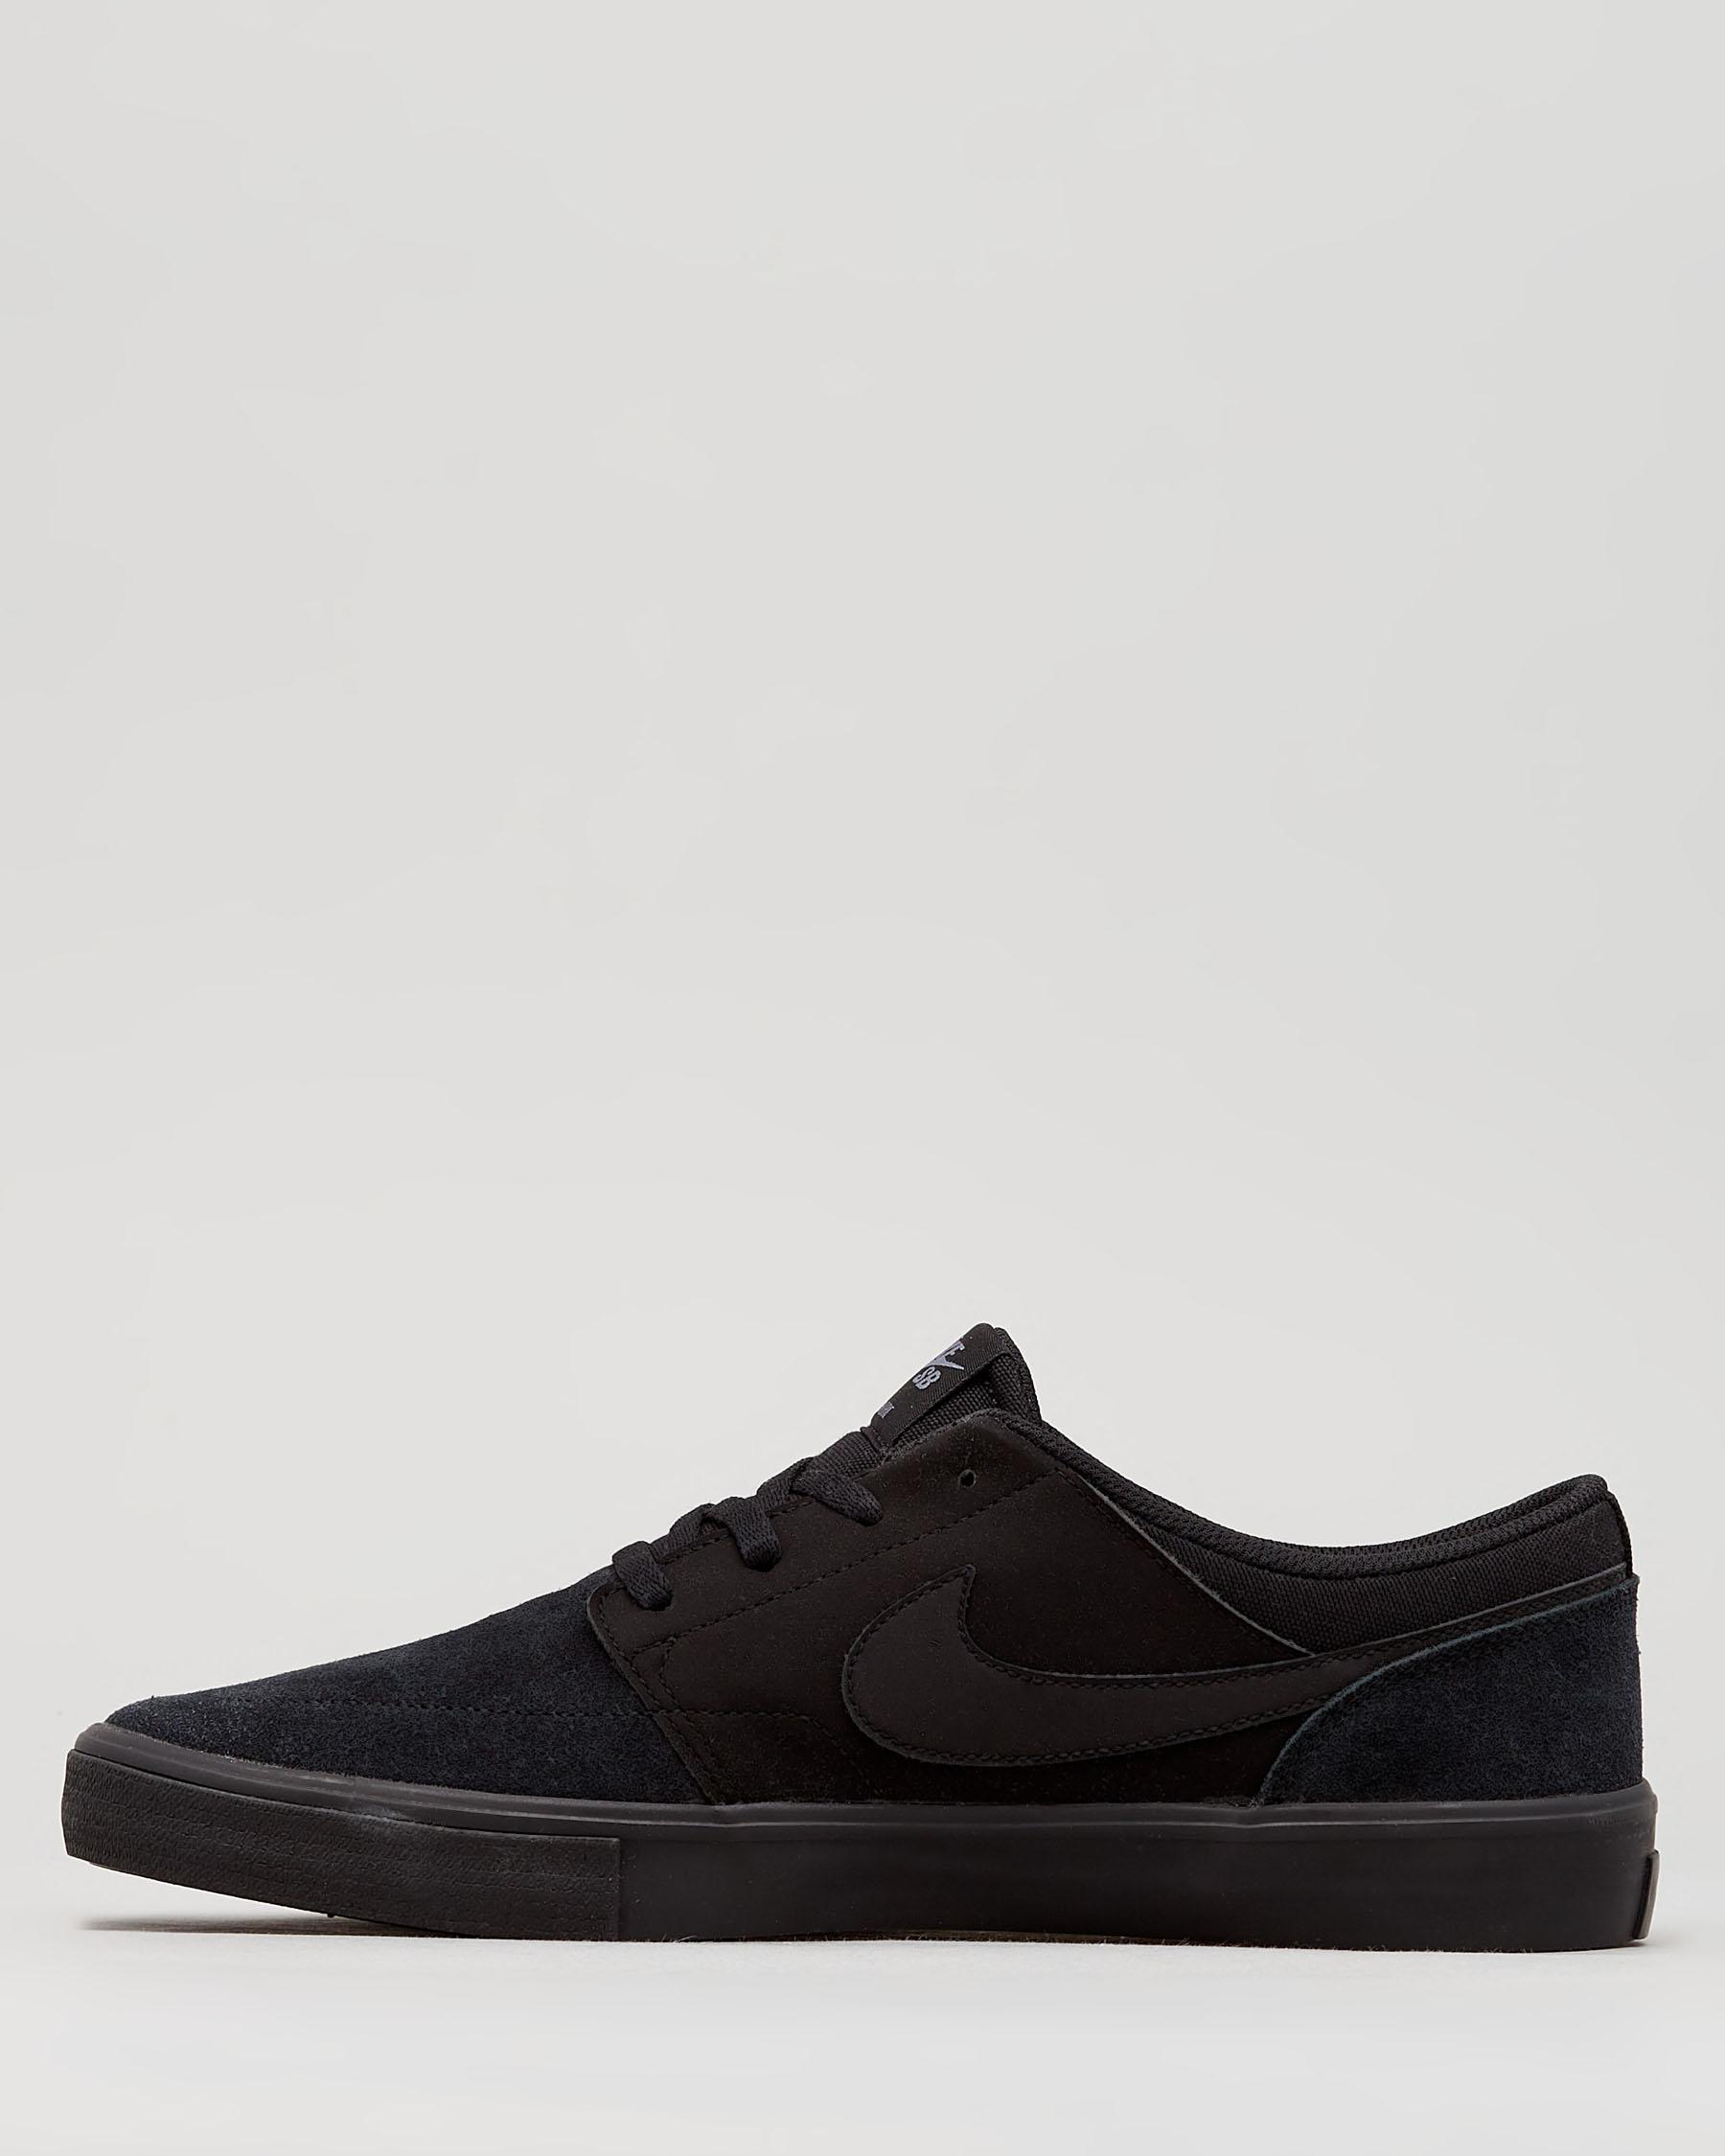 Nike Portmore Shoes In Black/black - Fast Shipping & Easy Returns ...